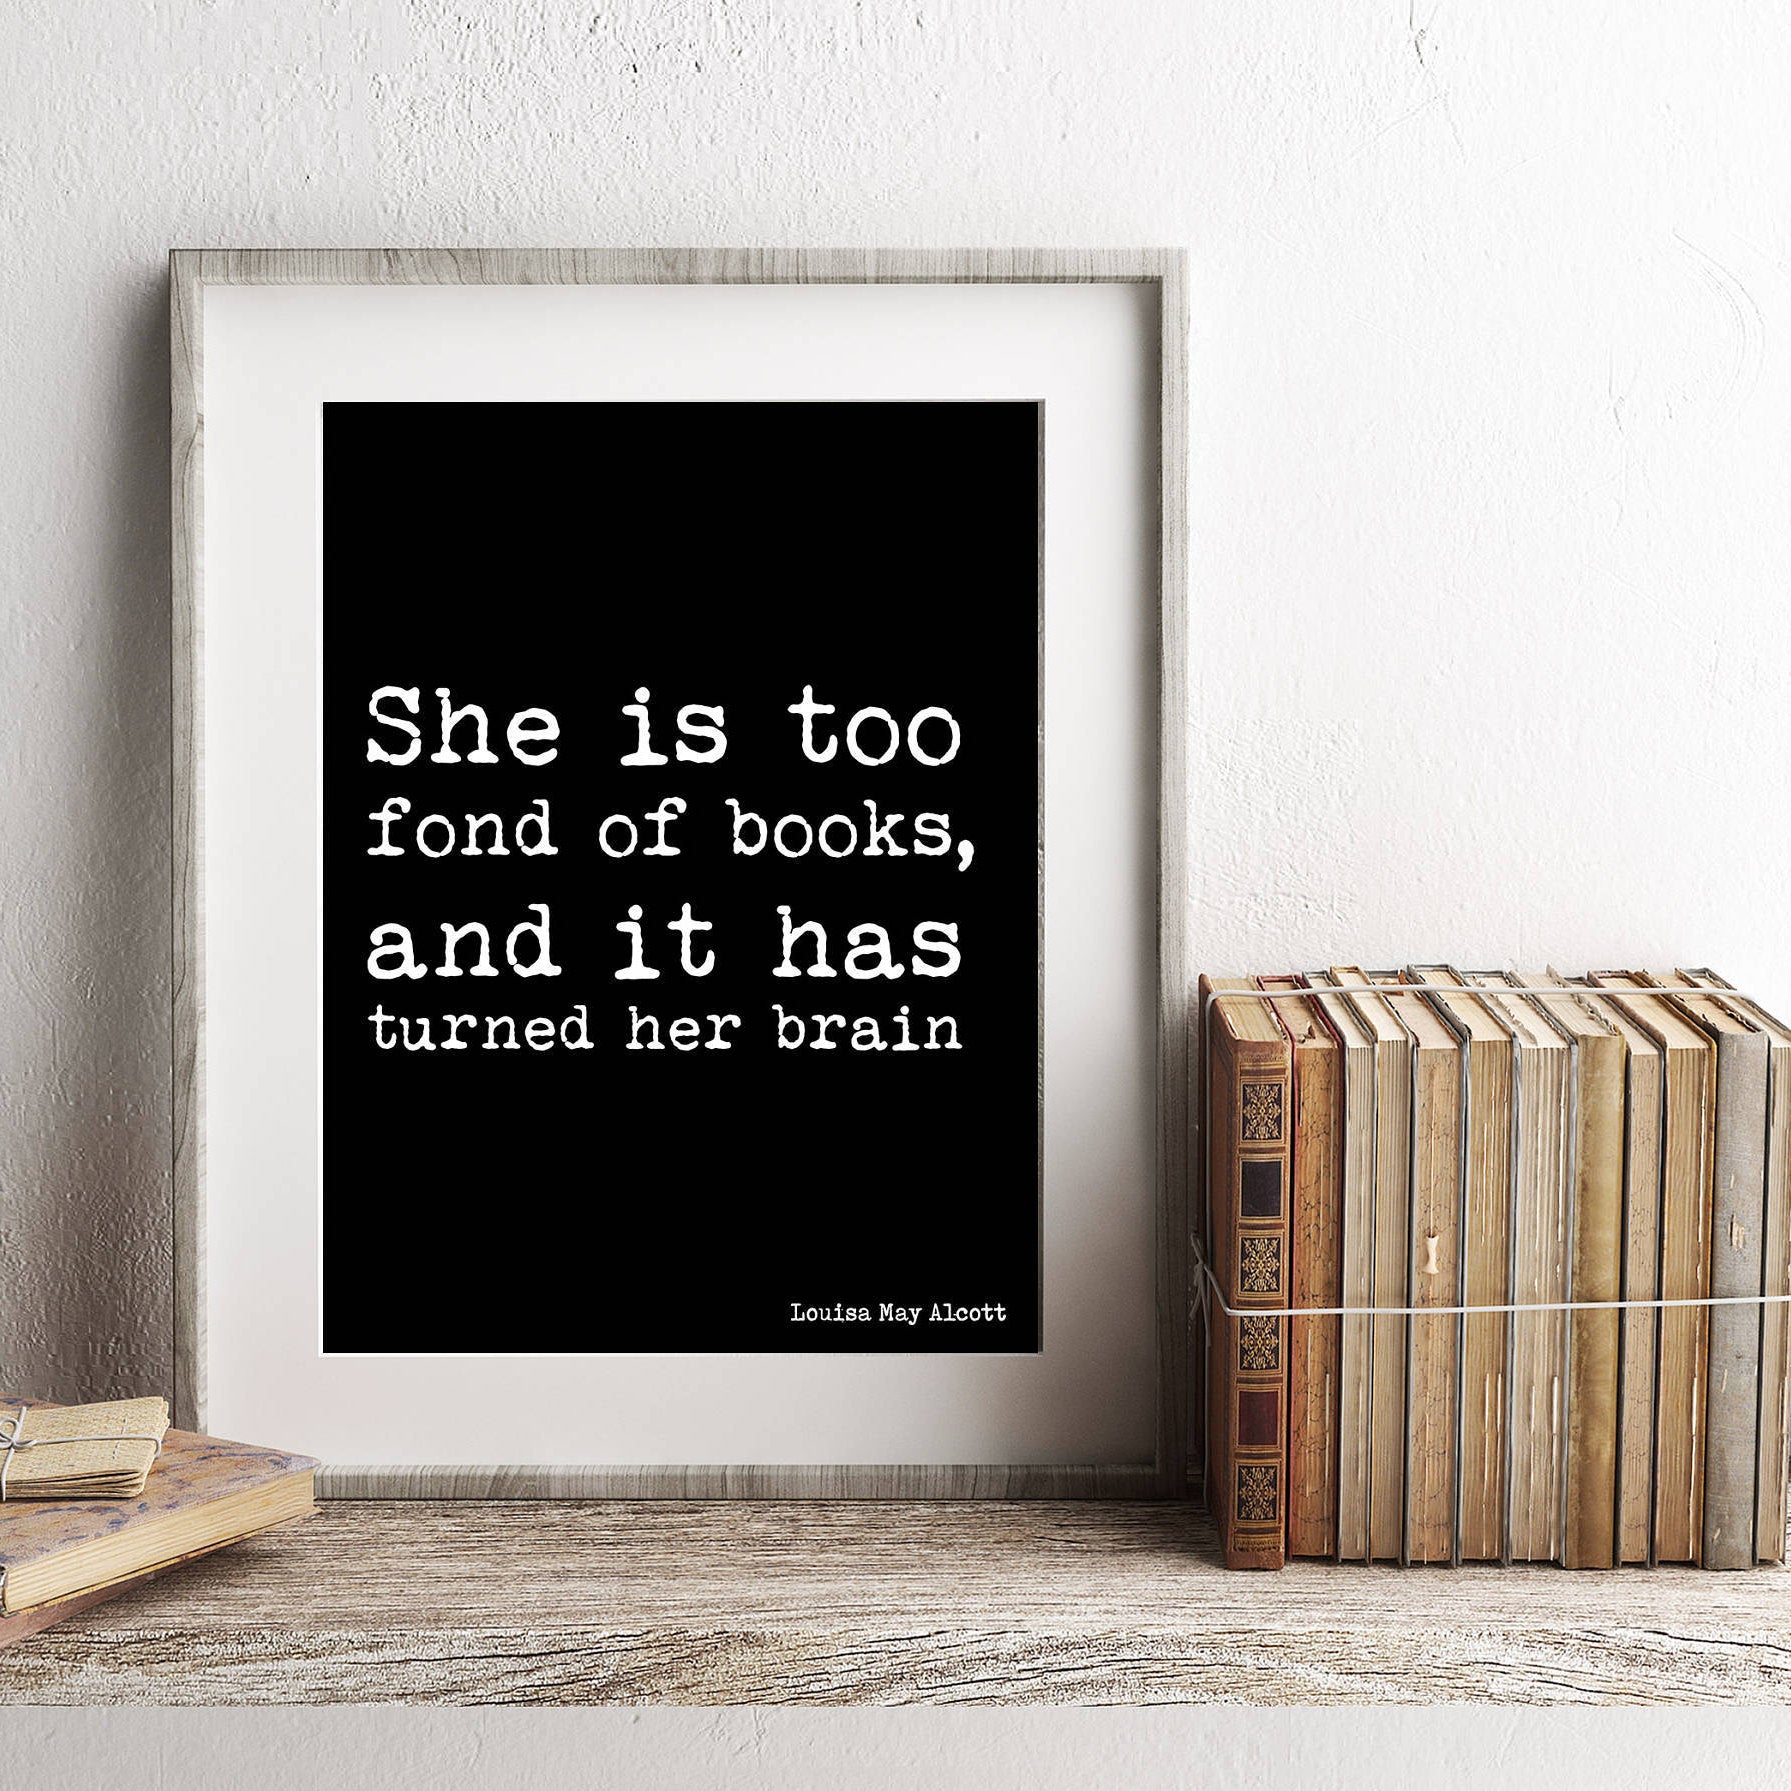 Too Fond of Books Wall Art Quote Print, Louisa May Alcott Little Women, Wall Decor Book Lover Gift Active